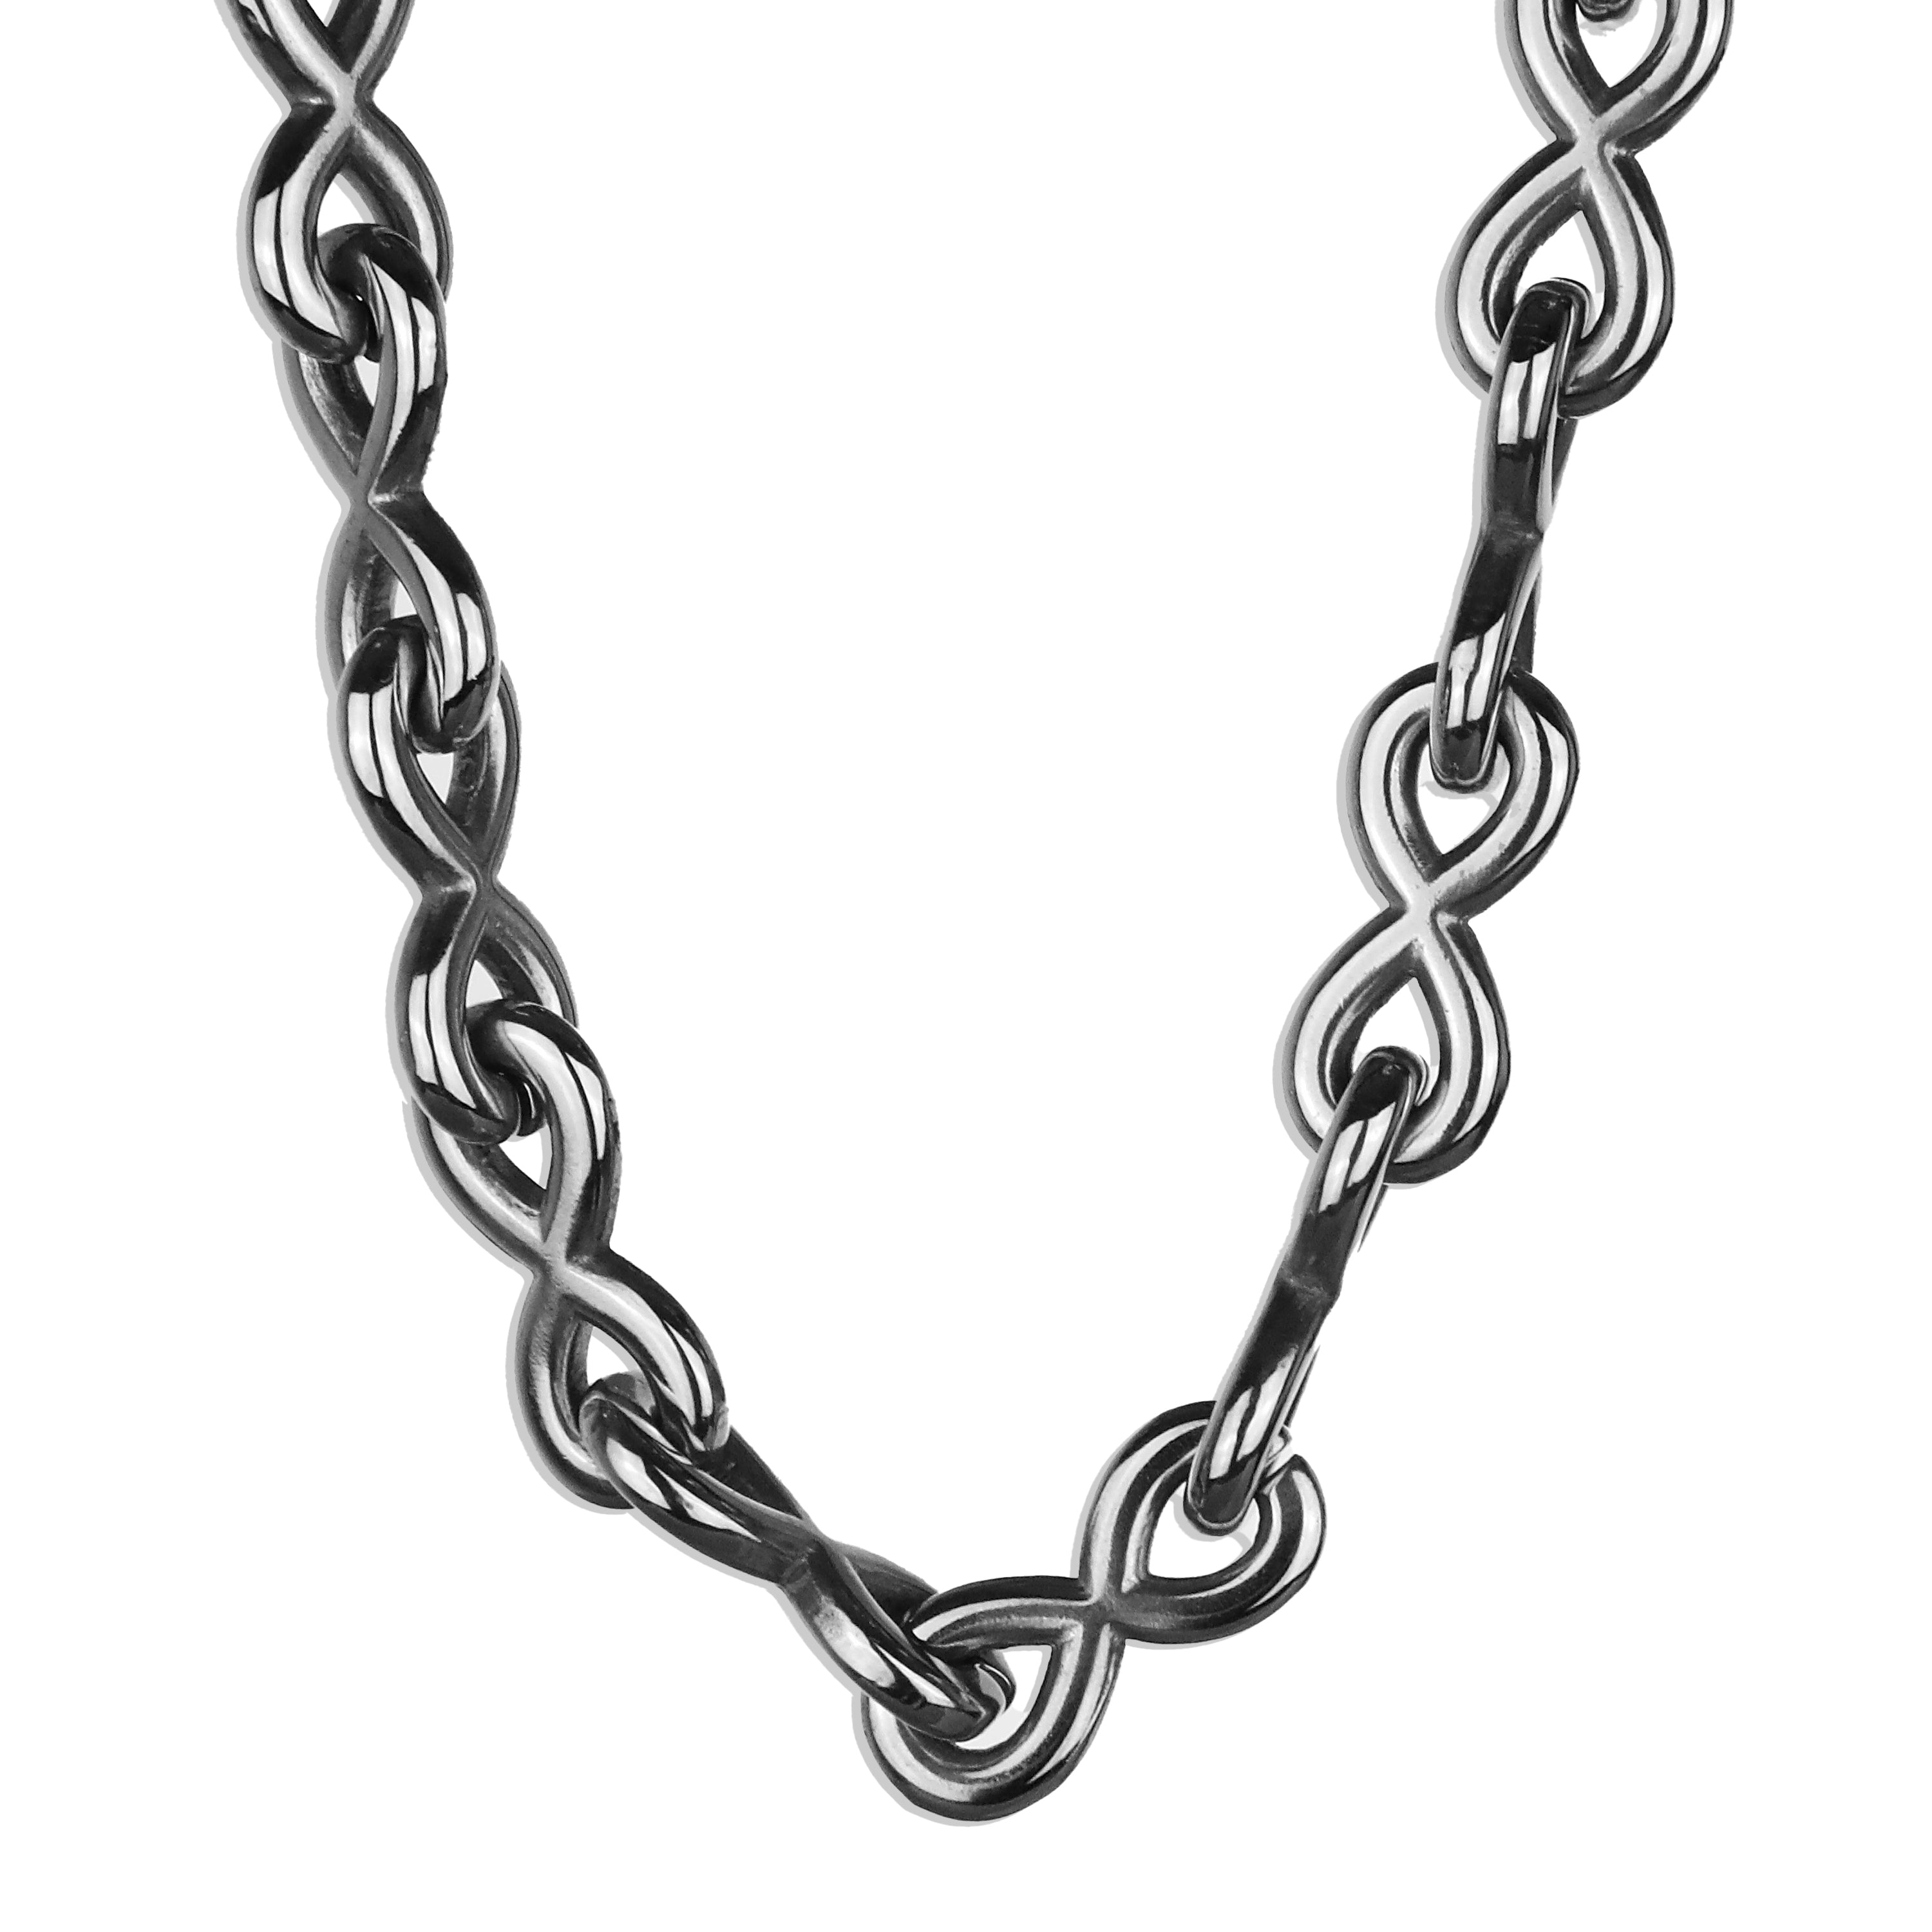 Infinity Chain Necklace - Silver 10mm